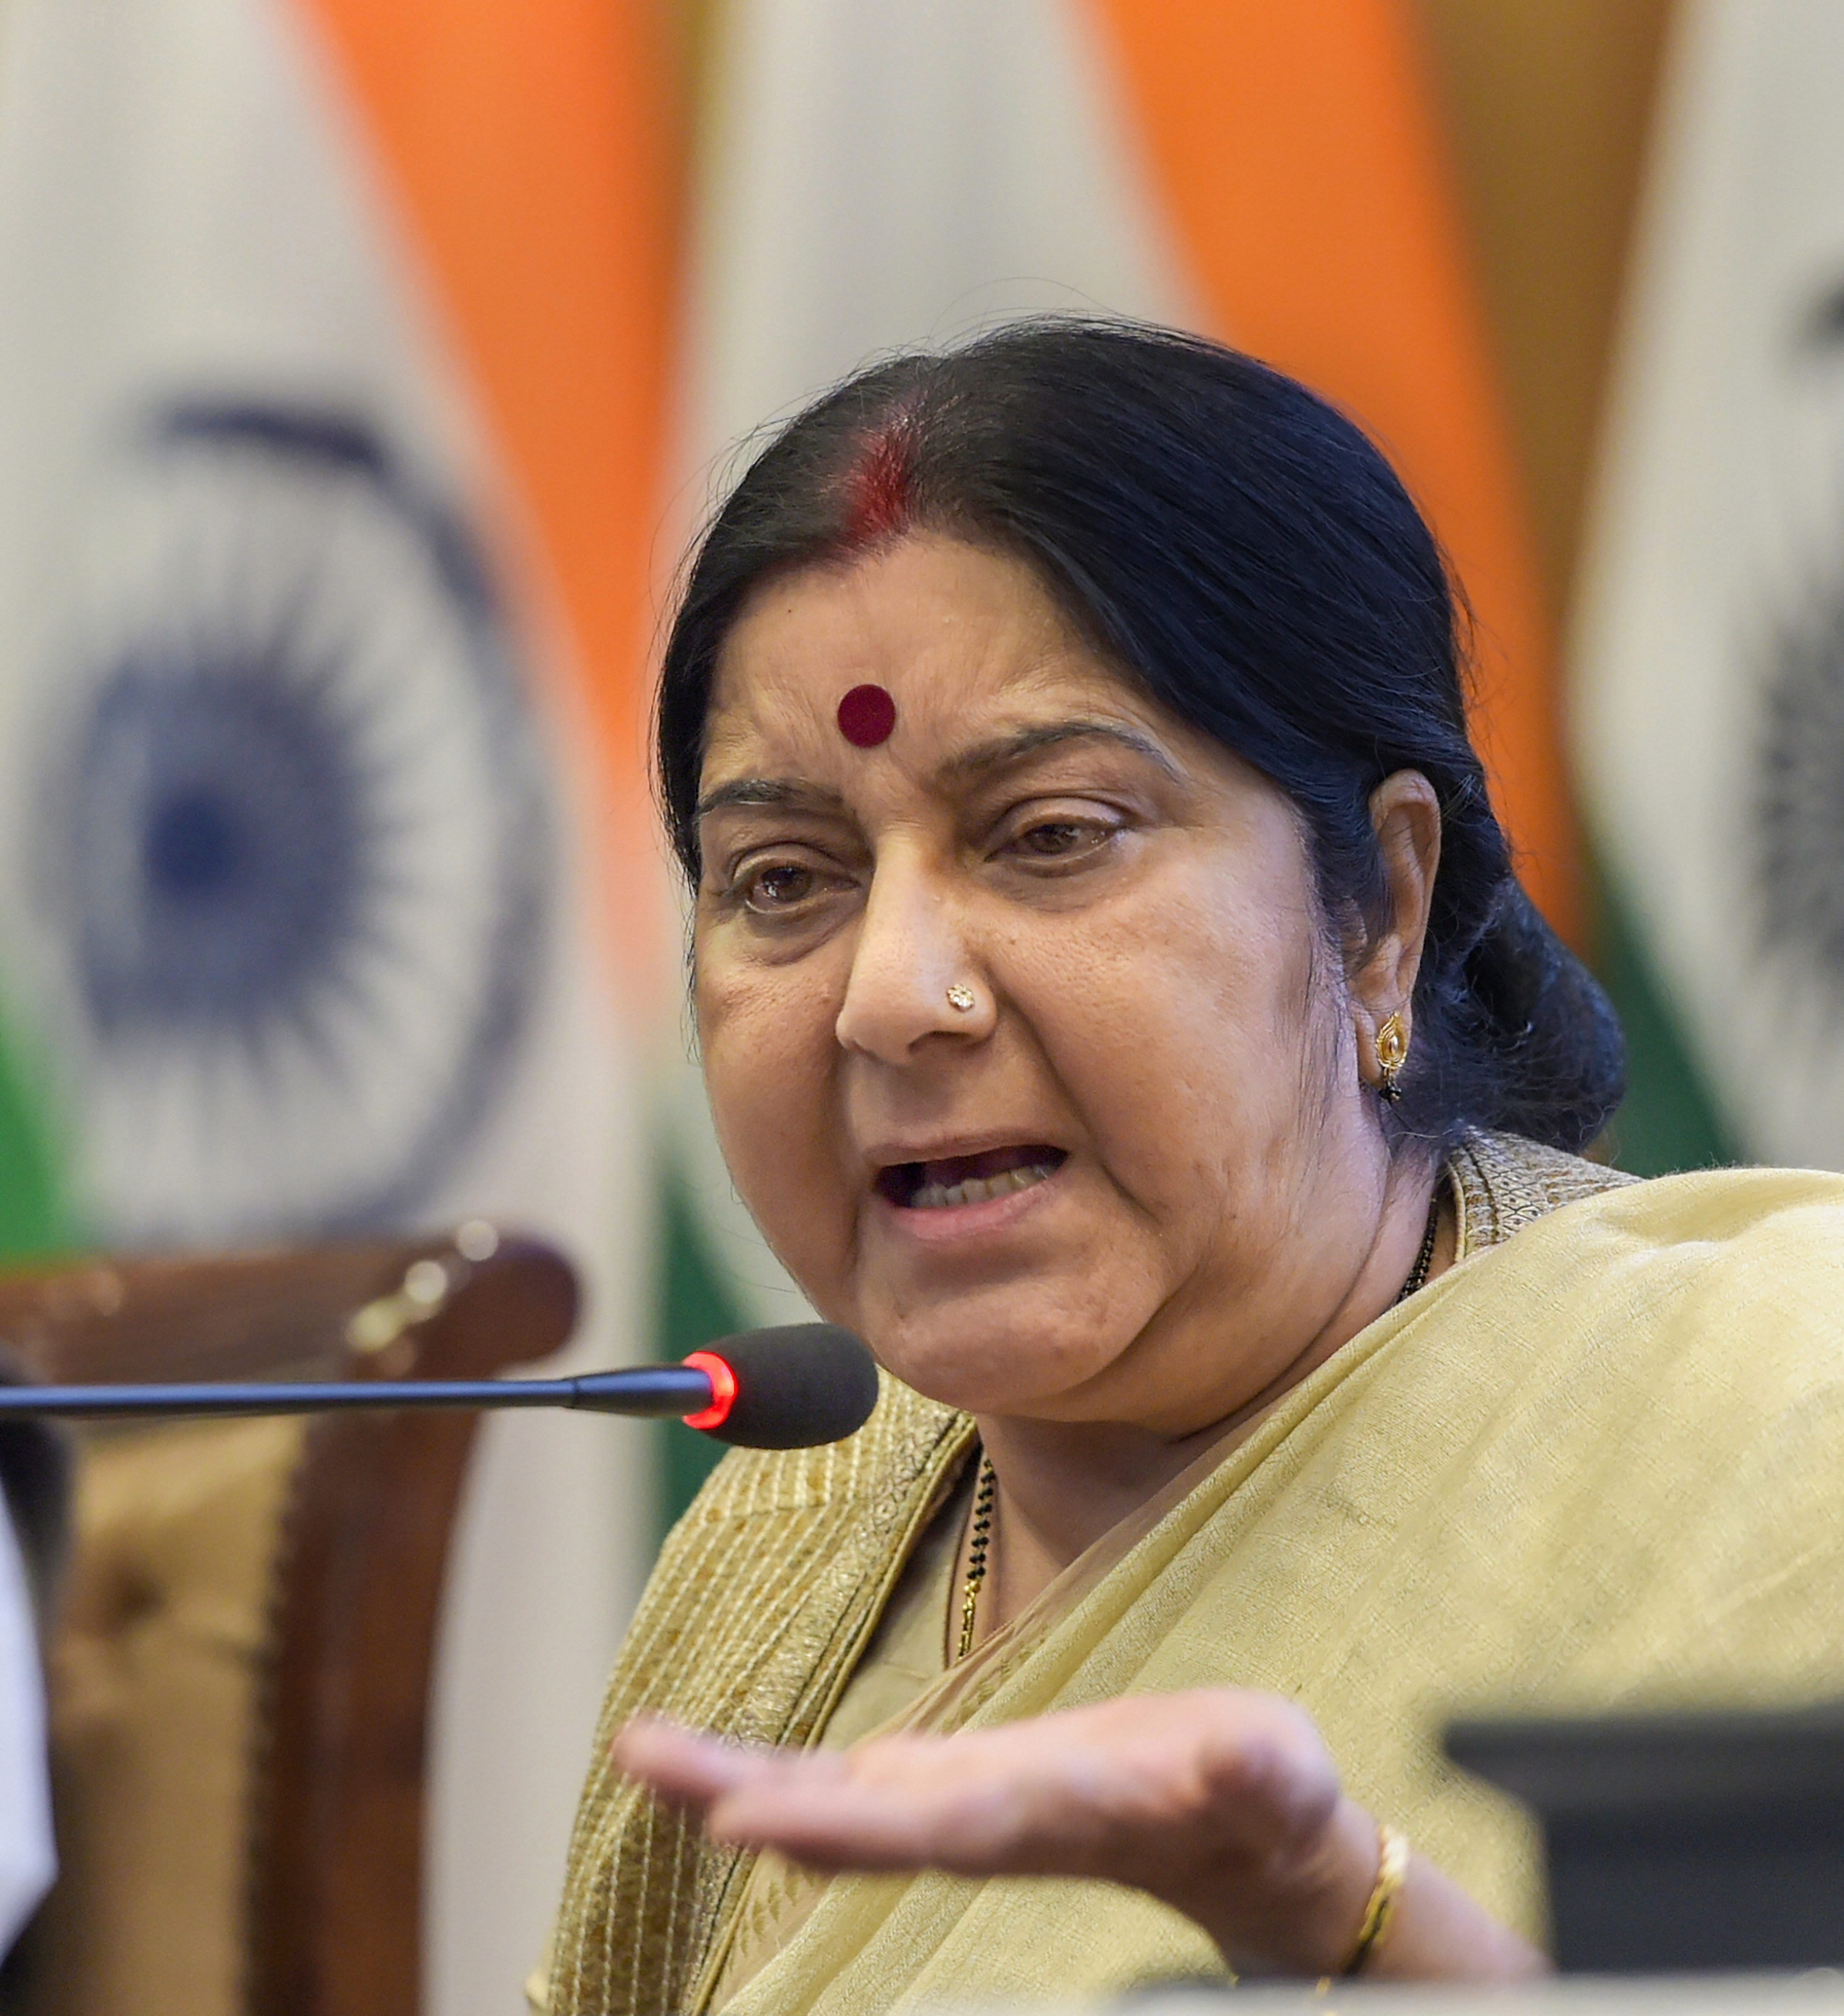 External Affairs Minister Sushma Swaraj will travel by train from Pentrich to Pietermaritzburg in South Africa next Thursday to be part of the event to mark the 125th anniversary of the day the Mahatma was humiliated. PTI file photo